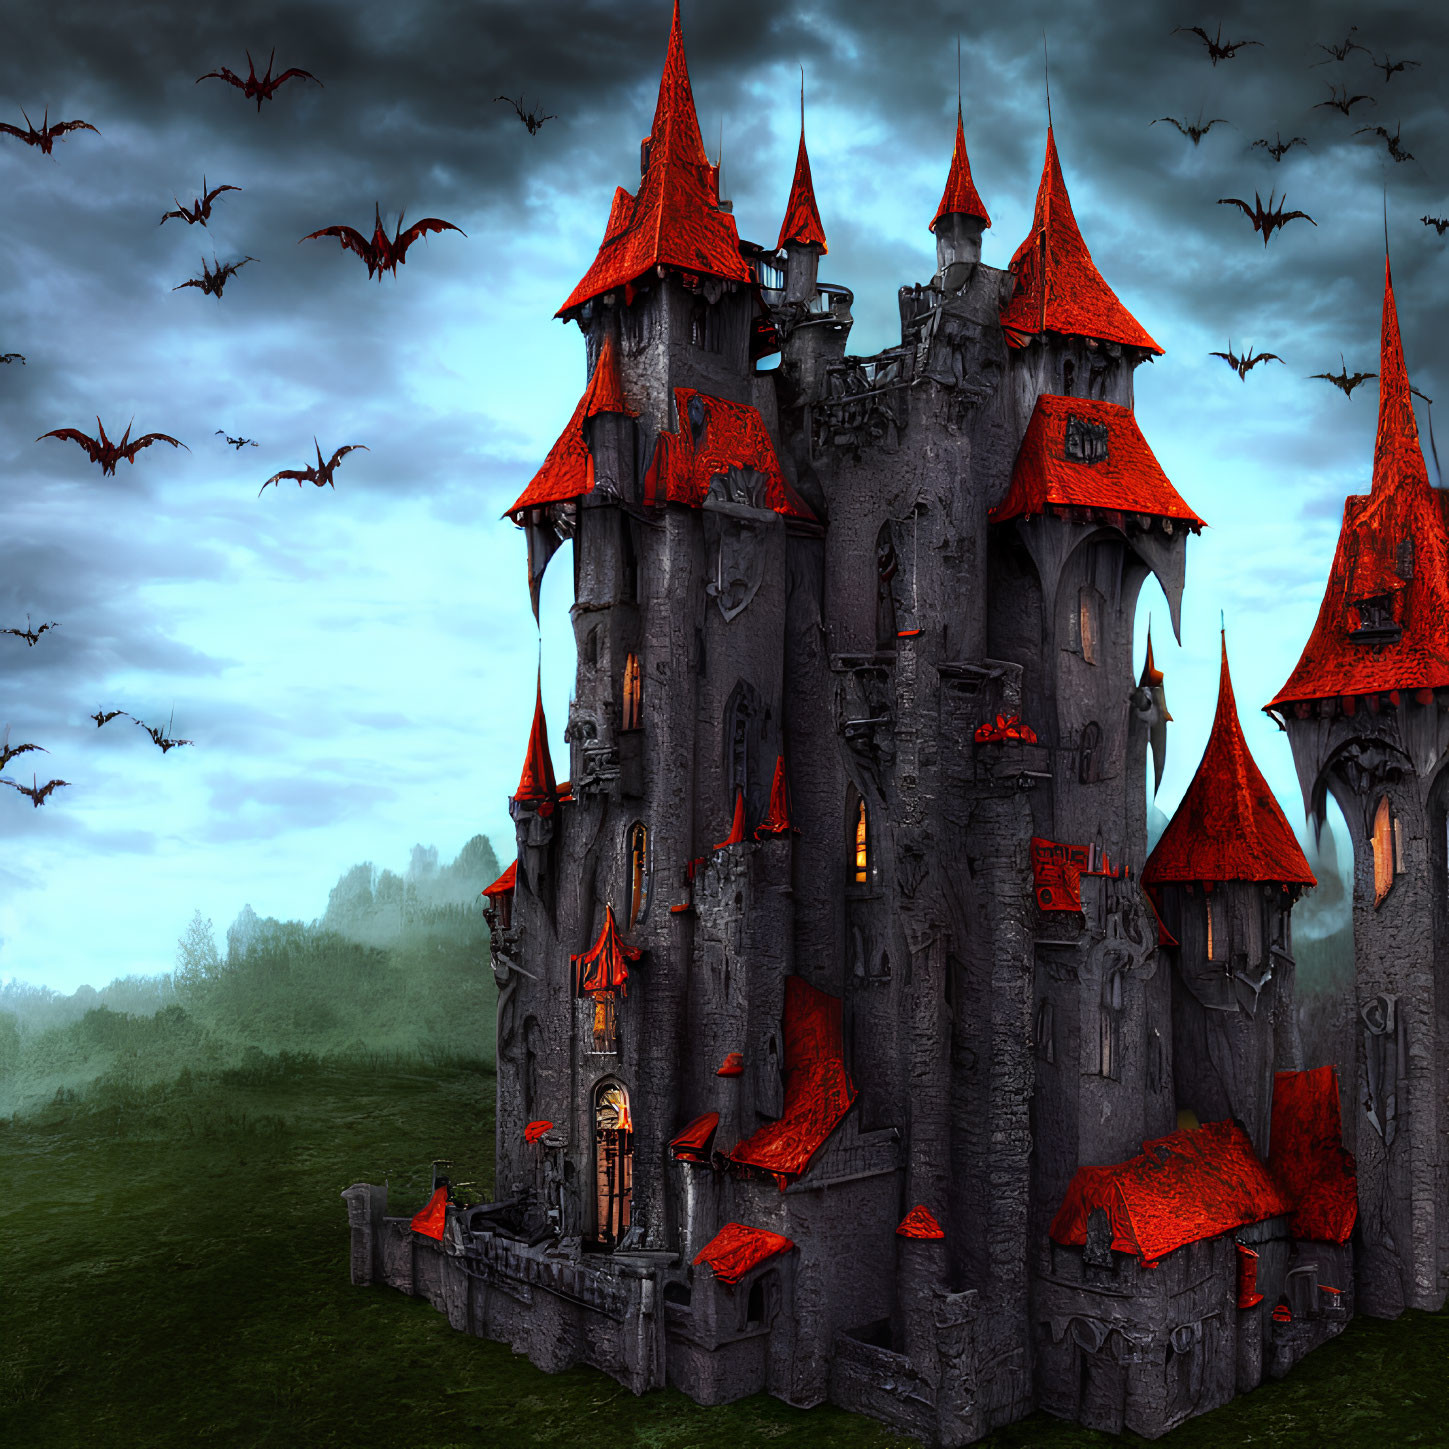 Stone castle with red roofs, spires, battlements, and flying bats under dusky sky